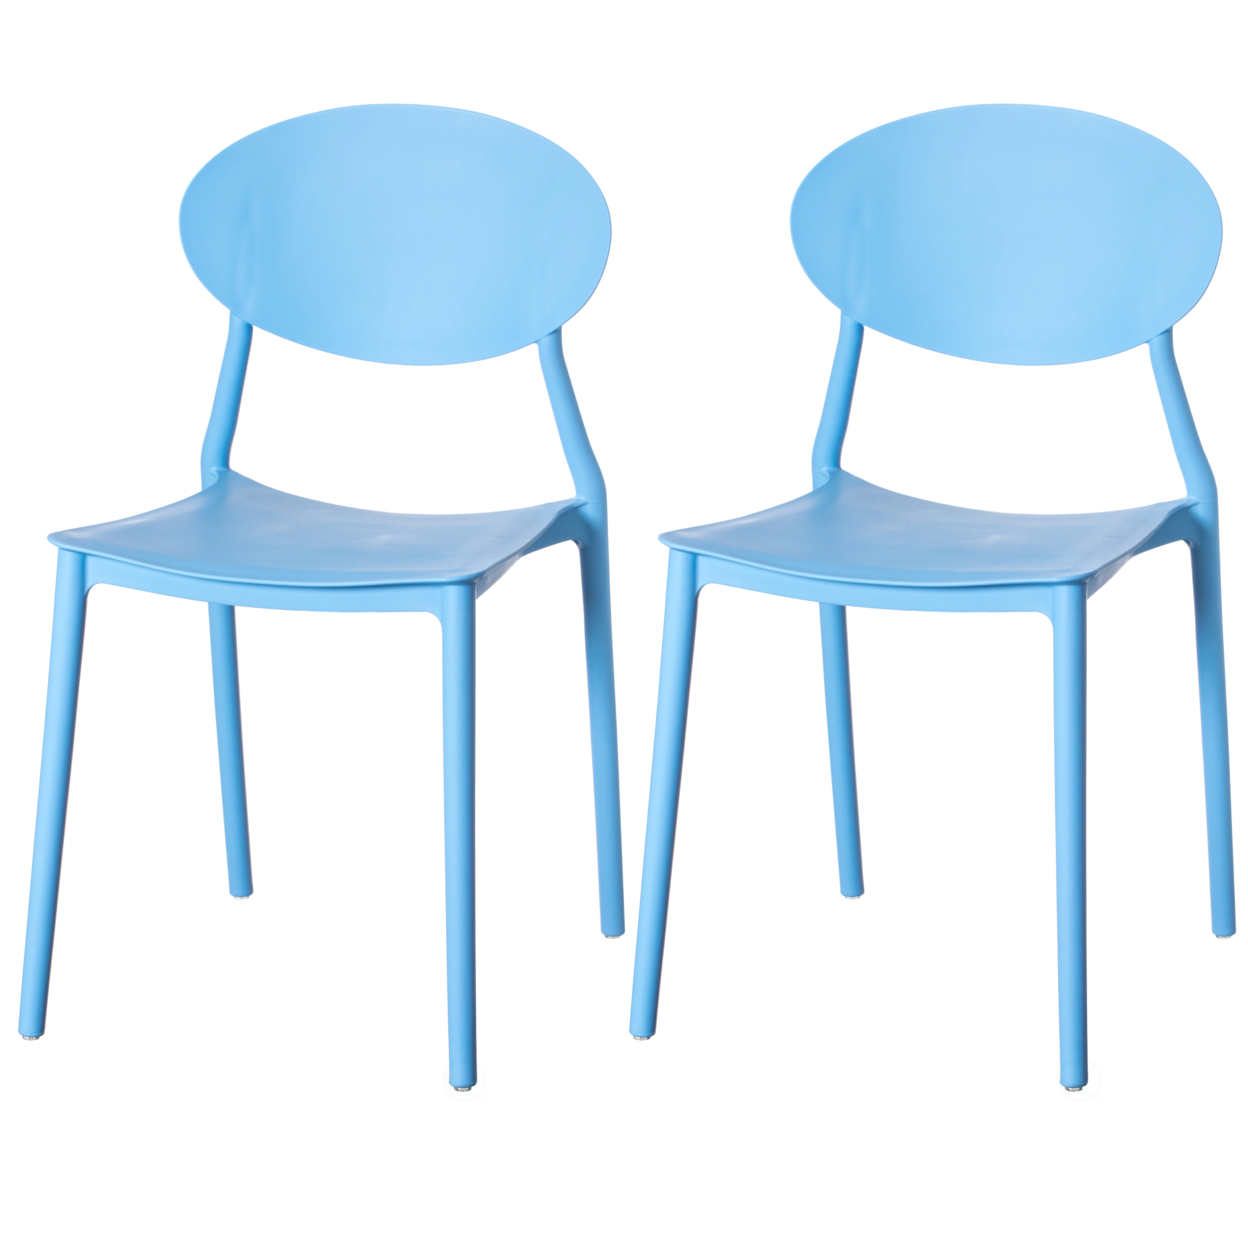 Modern Plastic Outdoor Dining Chair With Open Oval Back Design - Set Of 2 Blue